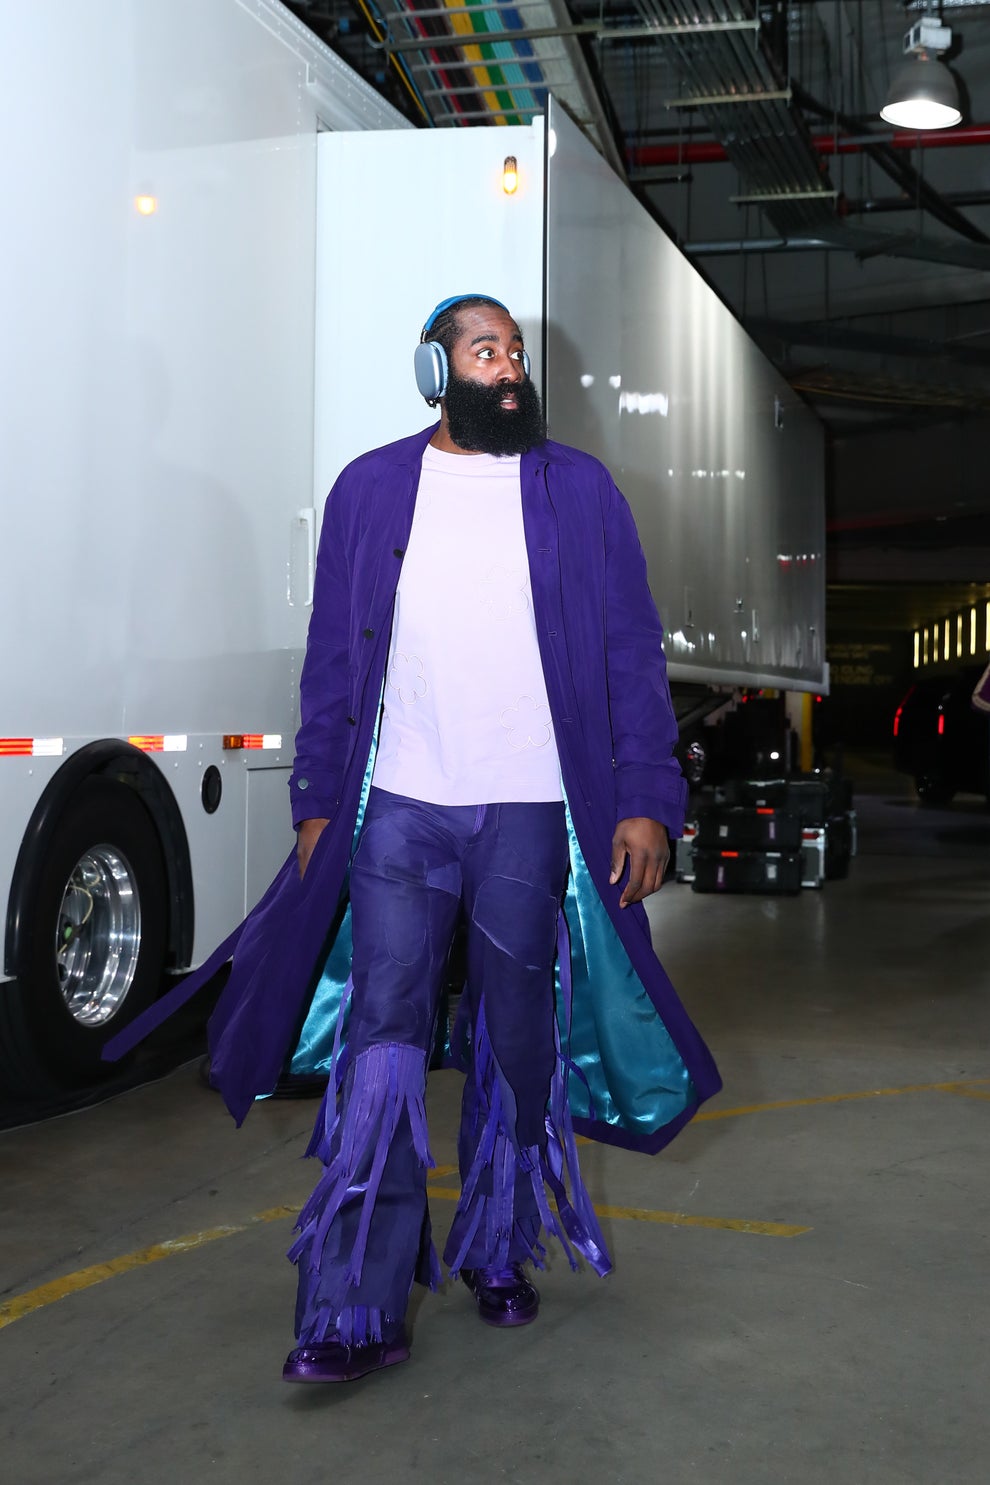 NBA Buzz - James Harden wore THIS before tonight's game against